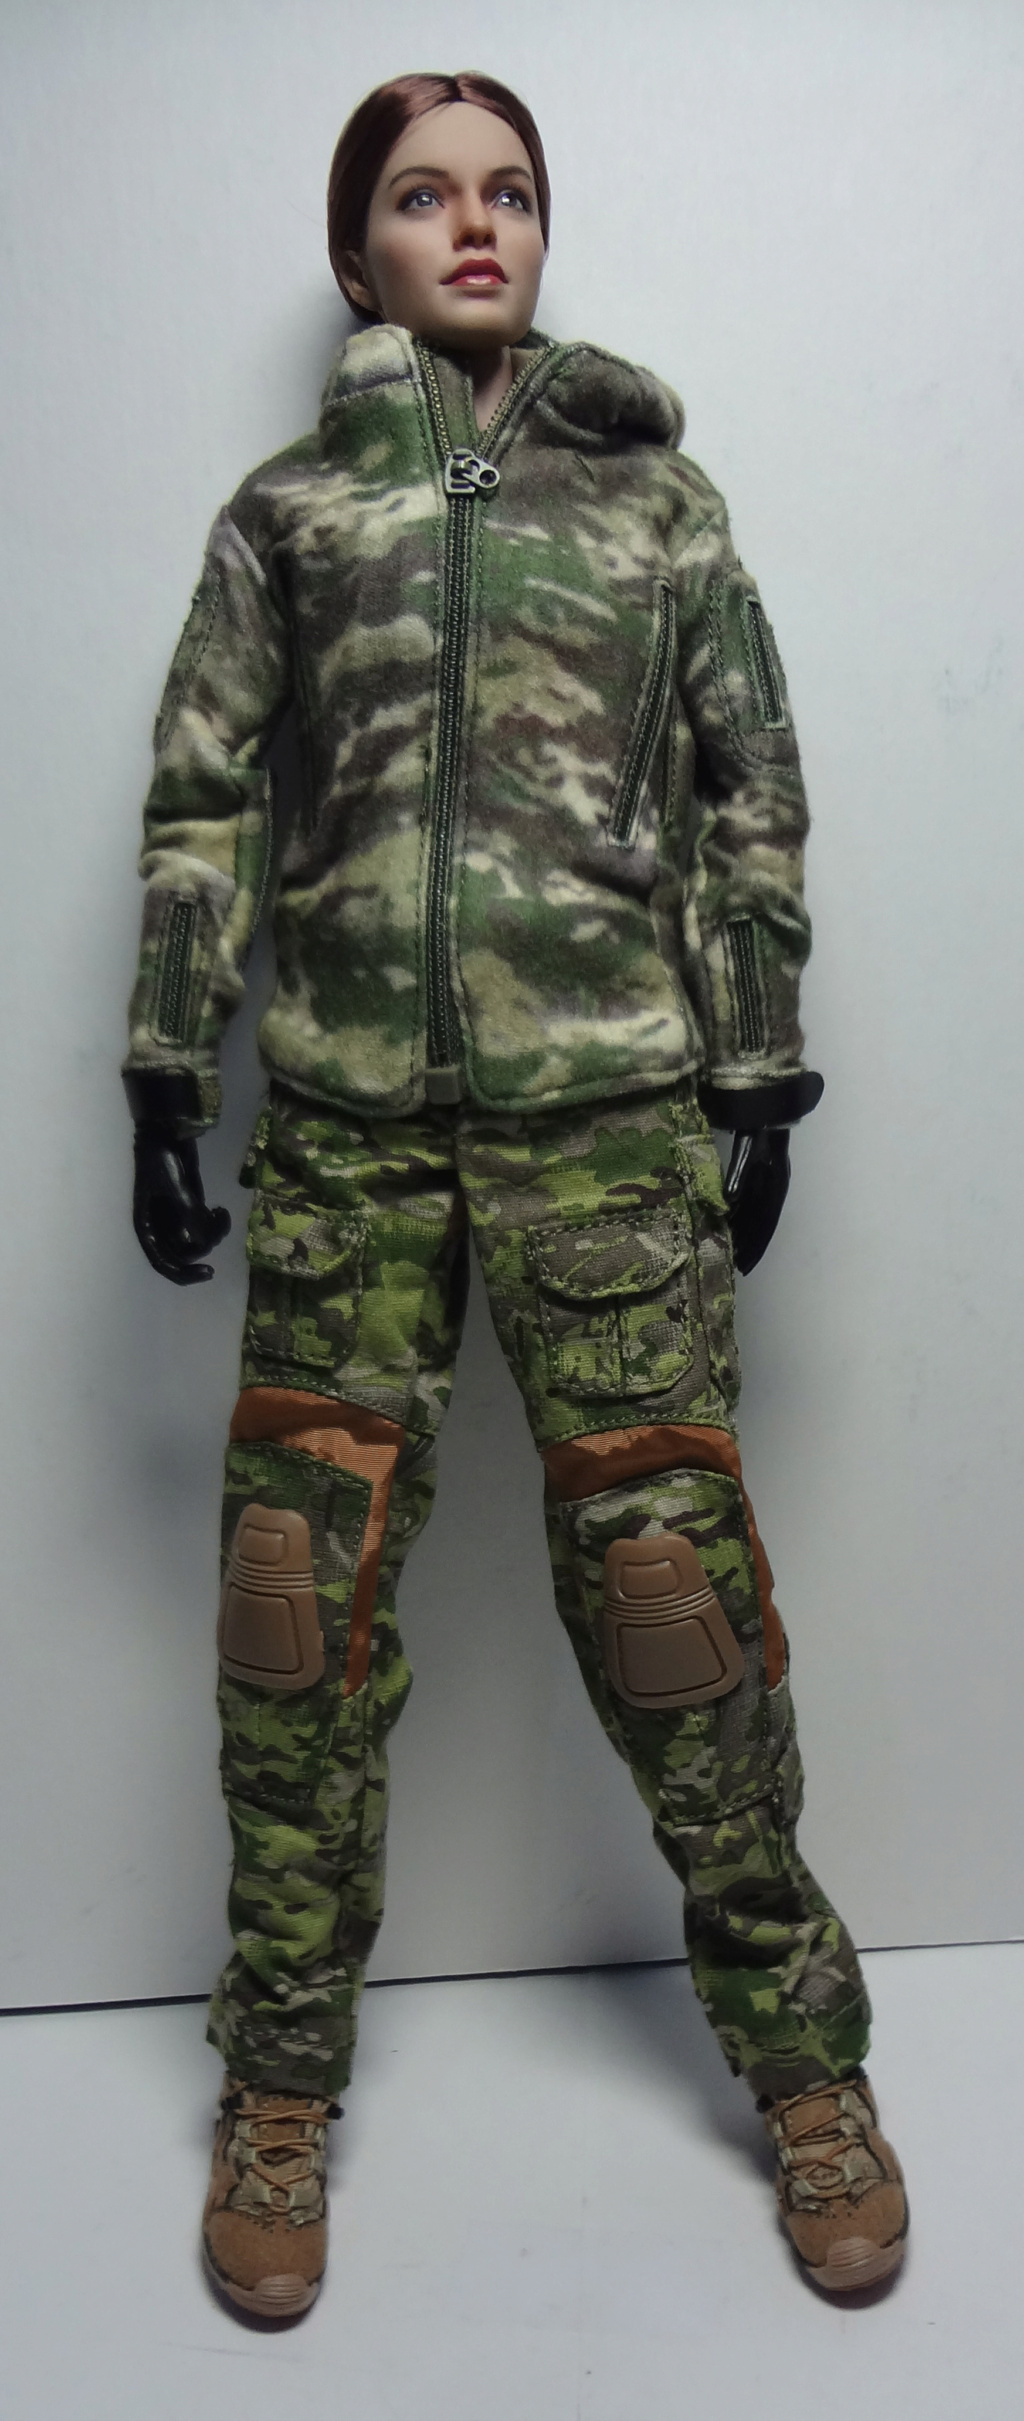 female - NEW PRODUCT: VERYCOOL: 1/6 Miss Spetsnaz: Russian Special Combat Russian special combat female action figure (#VCF-2052) - Page 4 0310